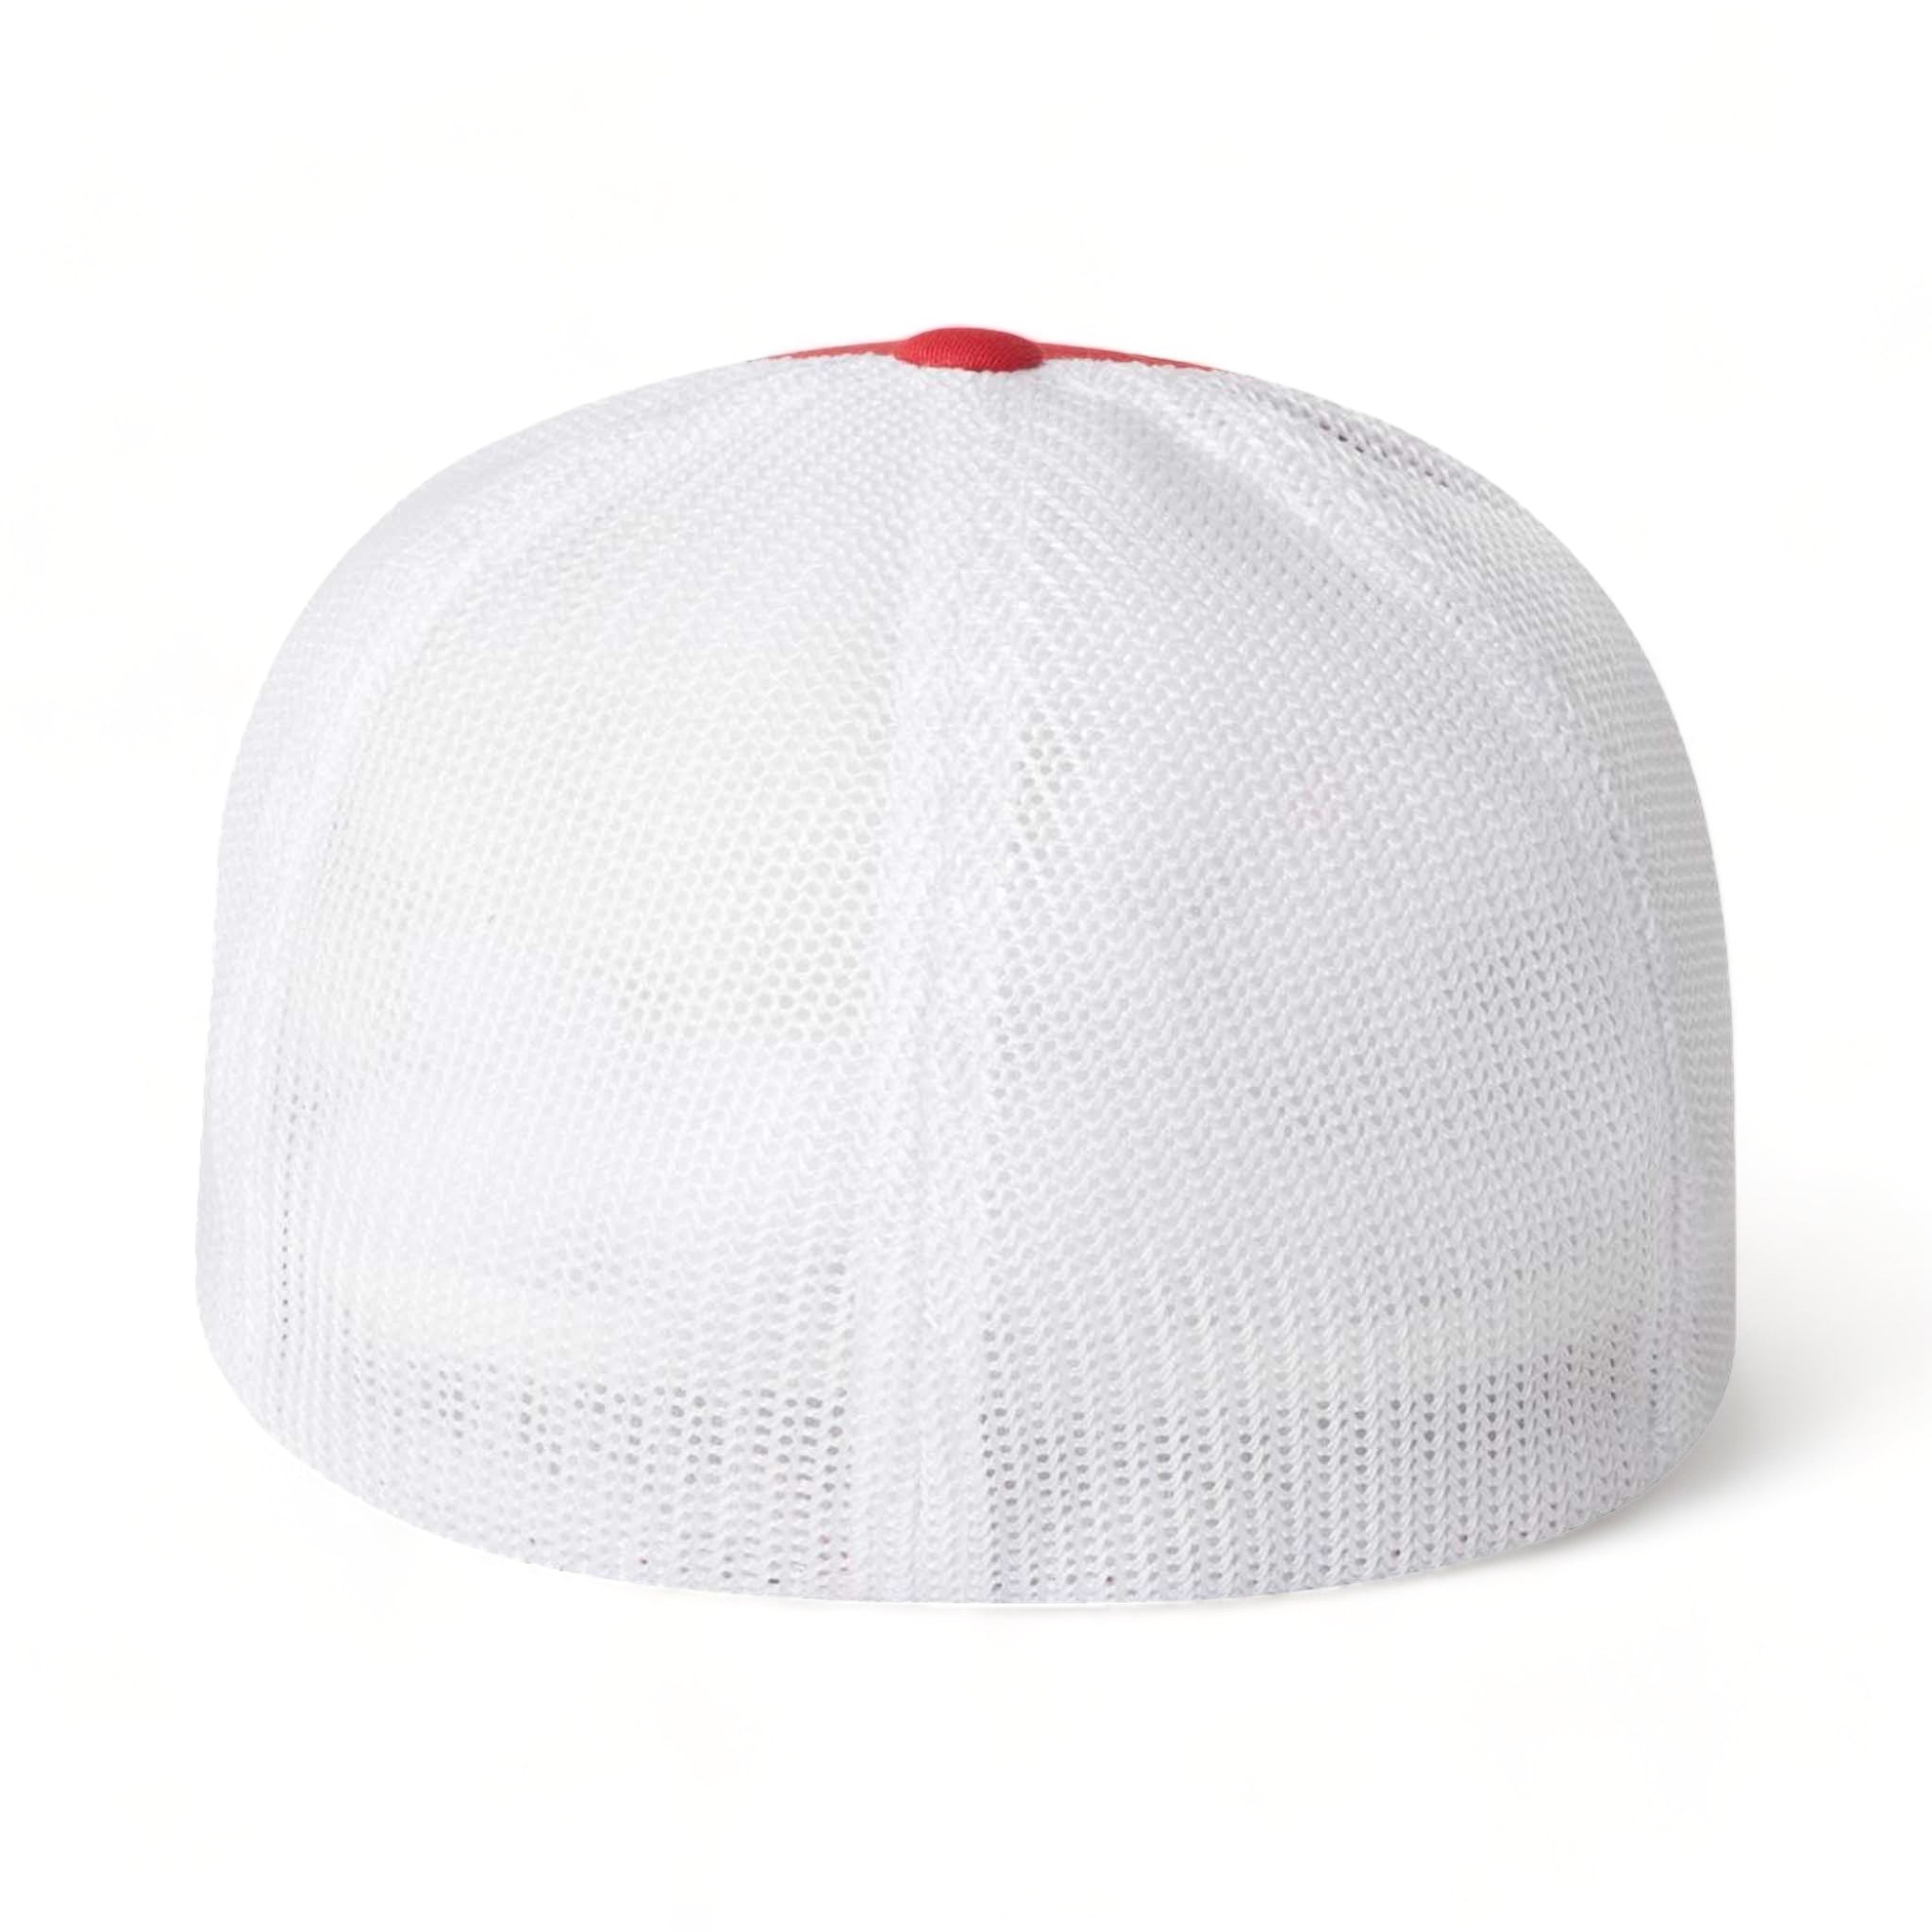 Back view of Flexfit 6511 custom hat in red and white